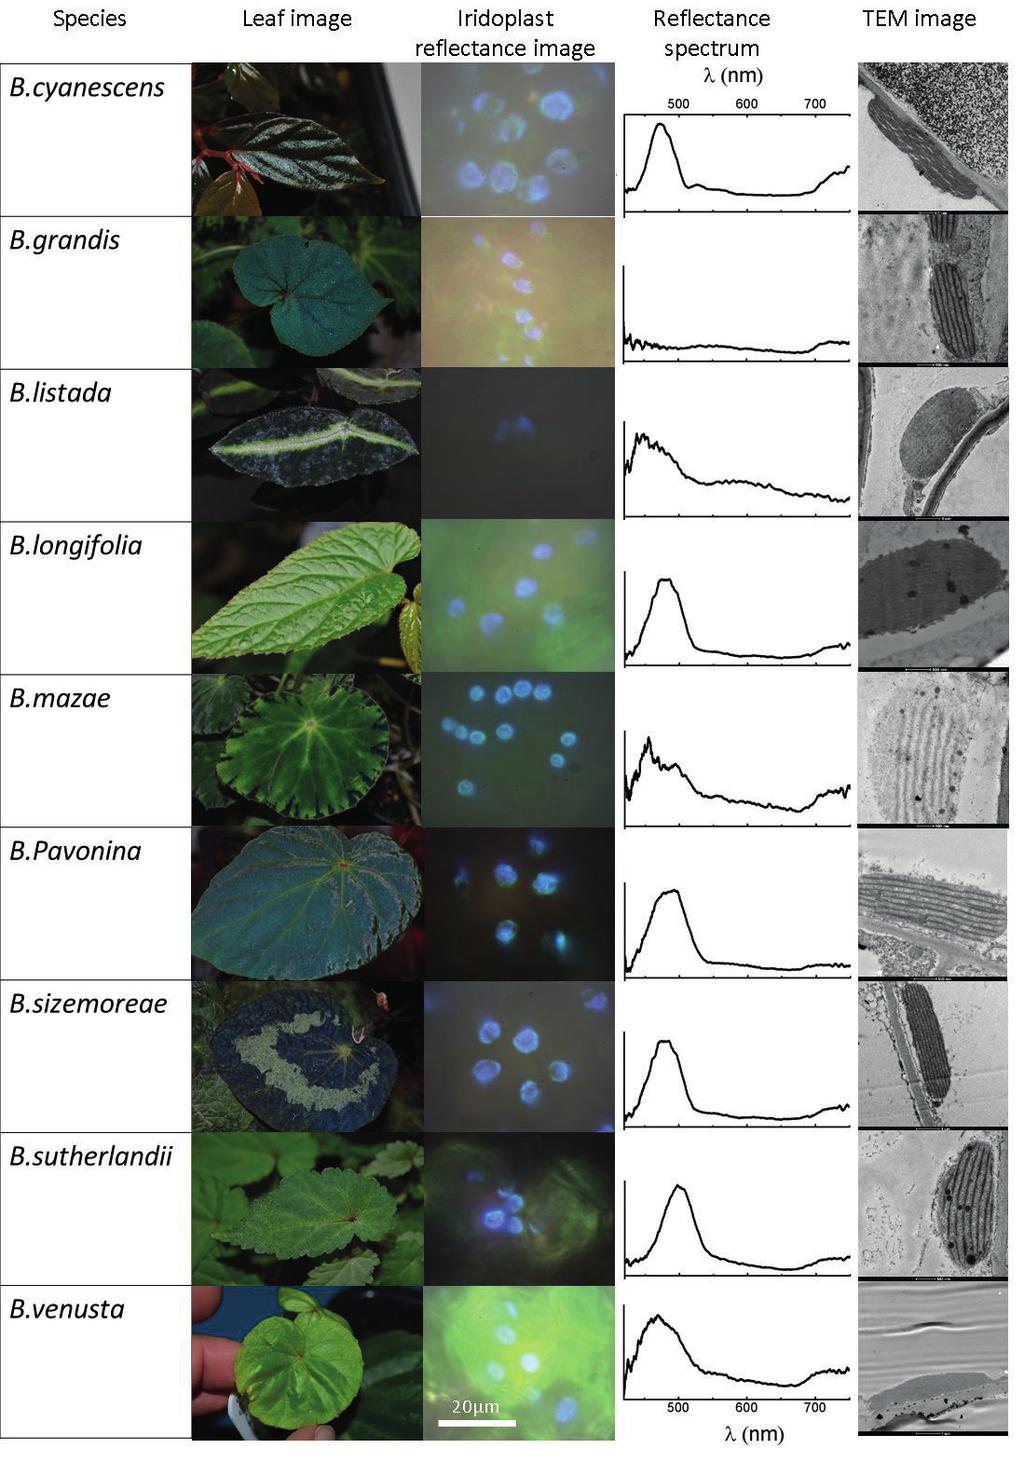 Supplementary Figure. S2 Extended table of Begonia species showing reflected light microscopy and spectra and TEM images of iridoplasts. Note B. grandis iridoplasts did not show a reflectance peak.